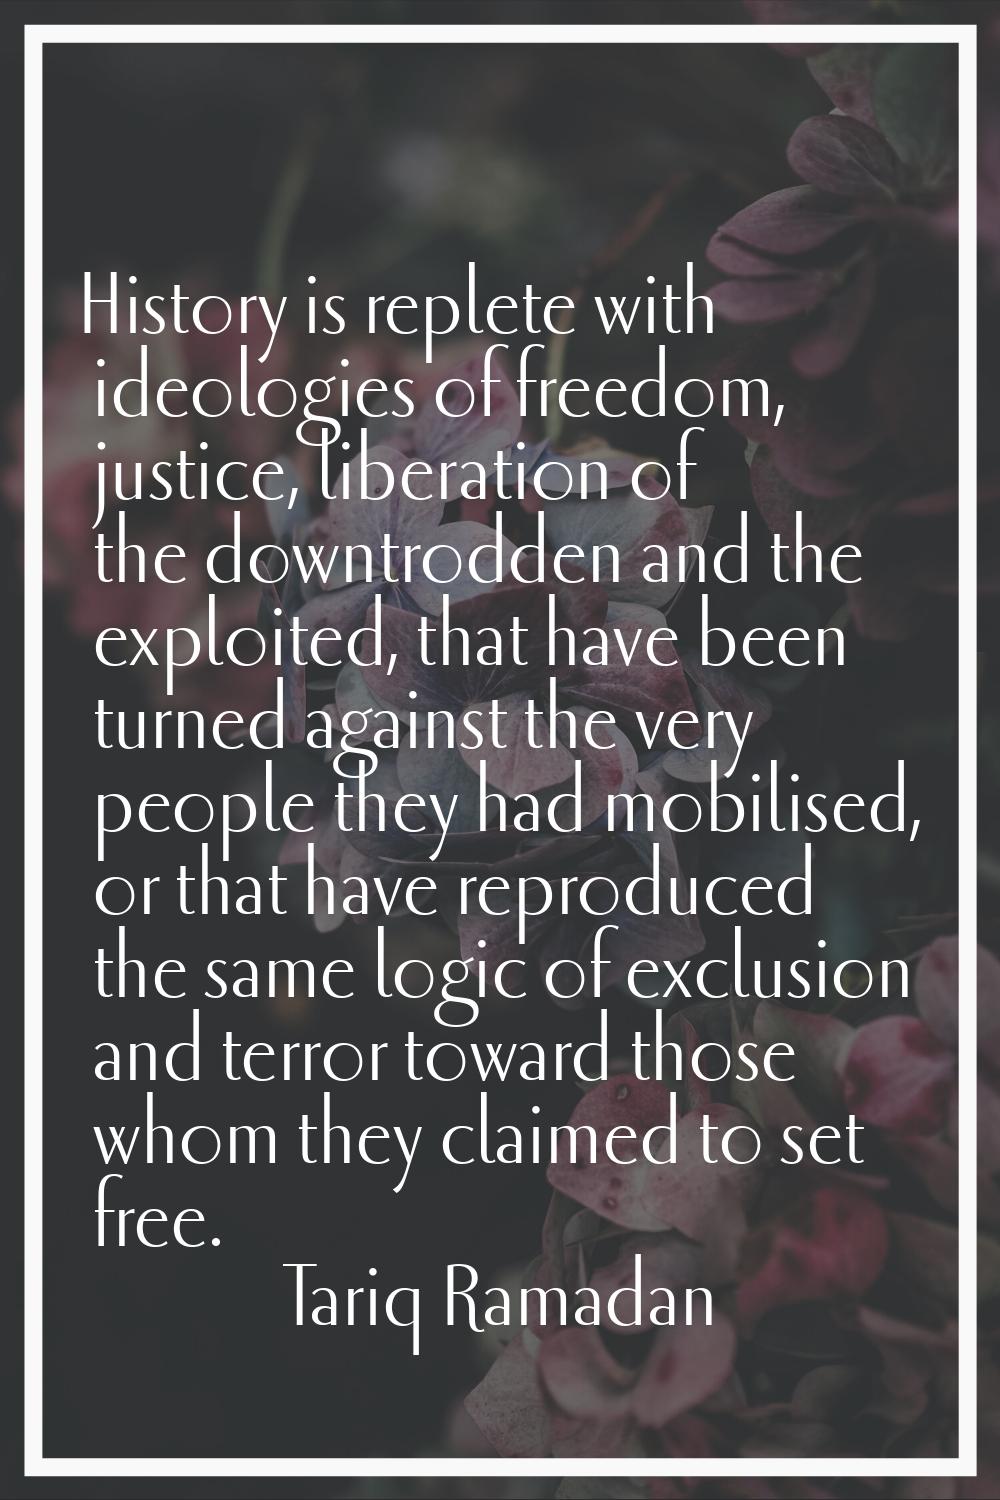 History is replete with ideologies of freedom, justice, liberation of the downtrodden and the explo